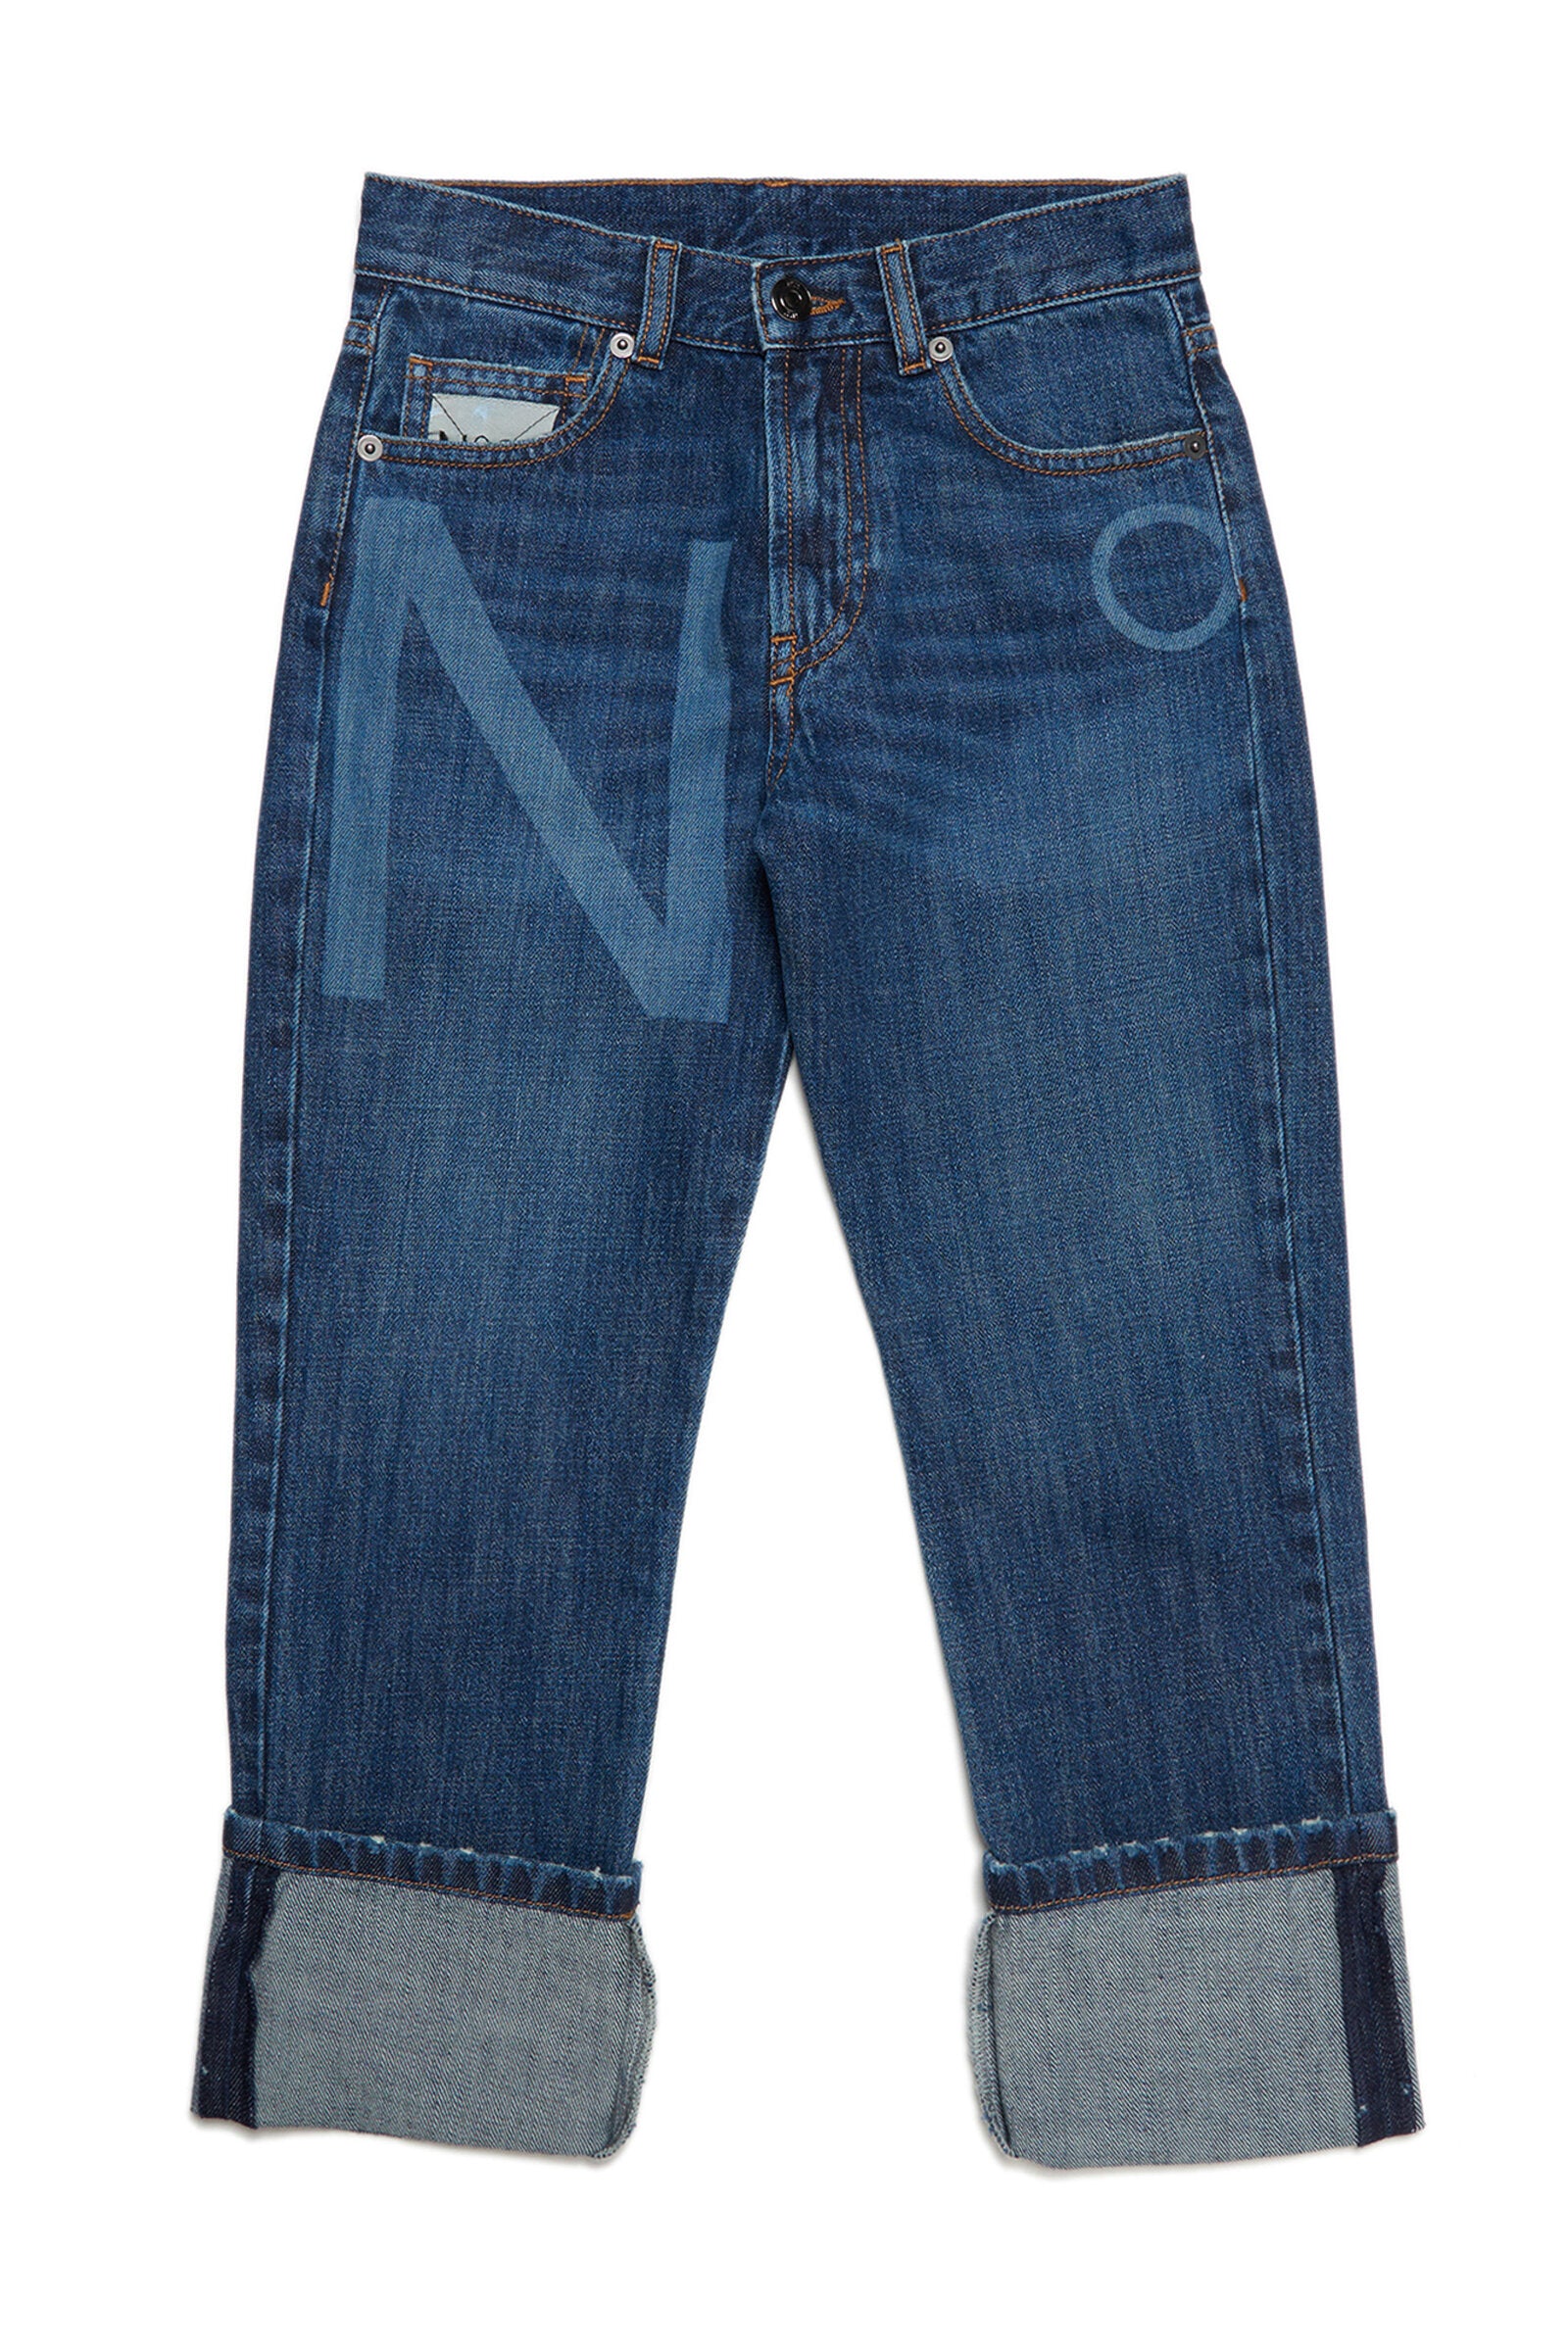 Dark blue five-pocket jeans with logo and roll-up bottom